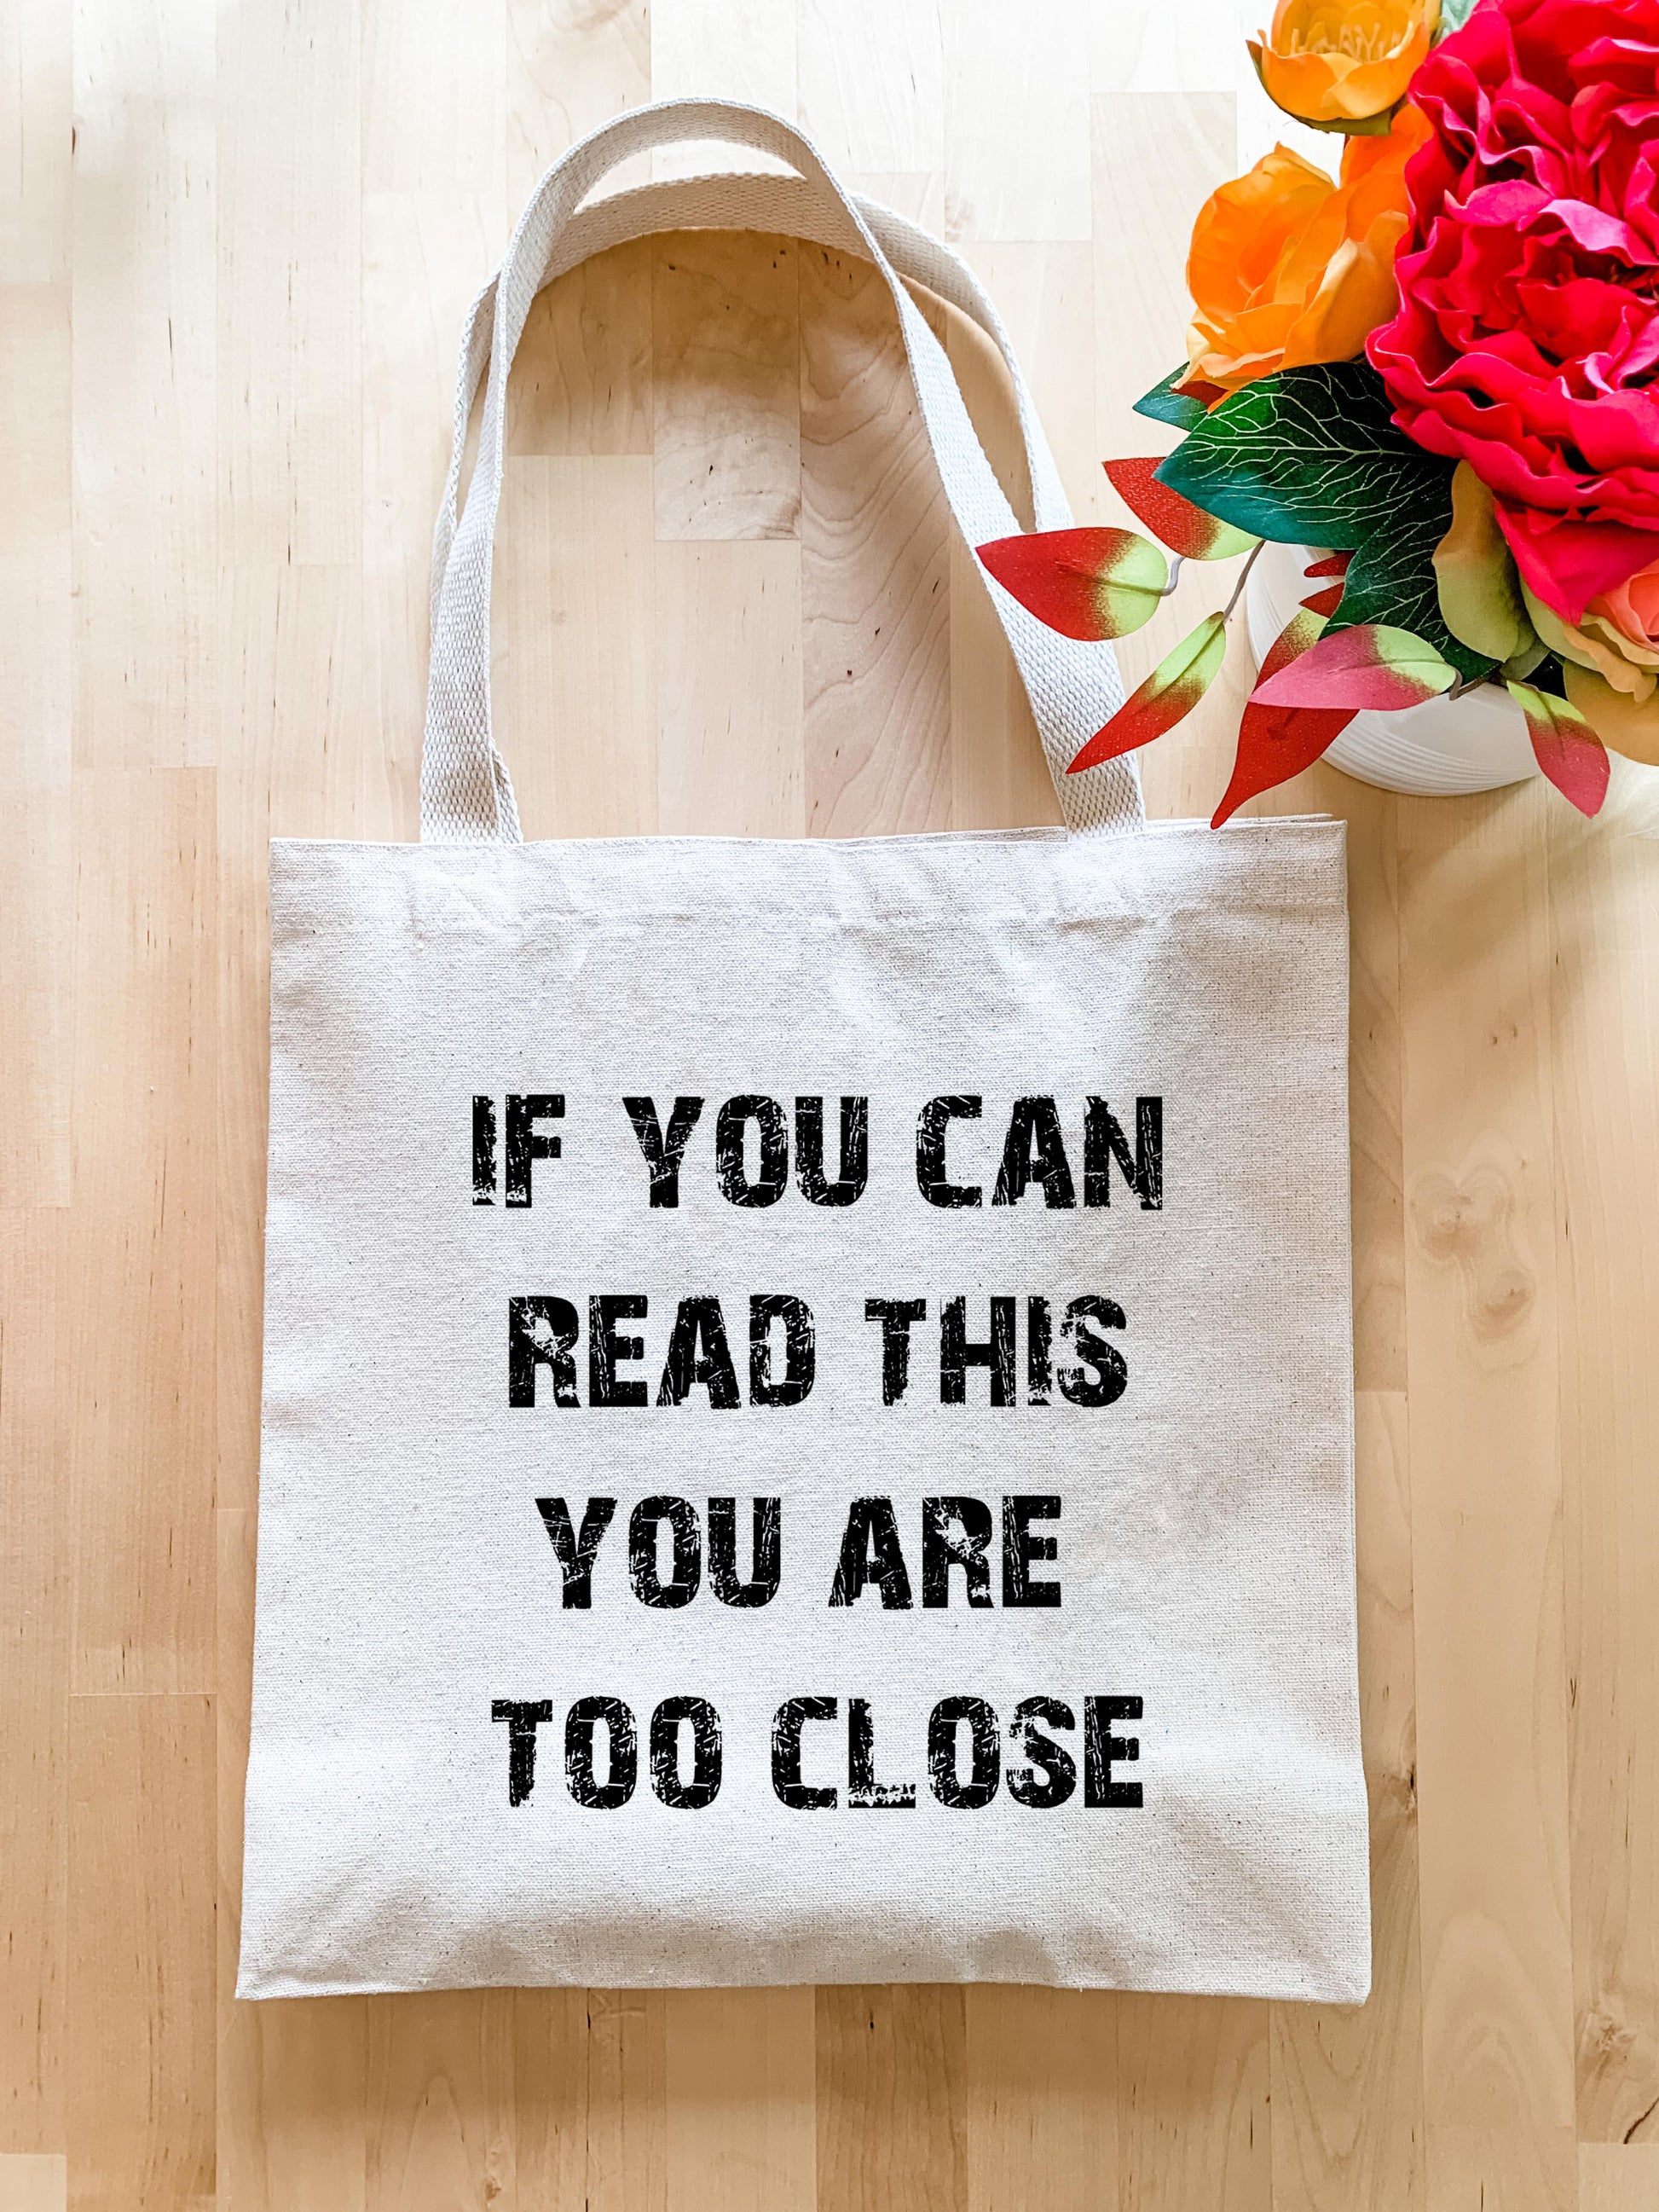 If You Can Read This You Are Too Close (Social Distancing) - Tote Bag - MoonlightMakers